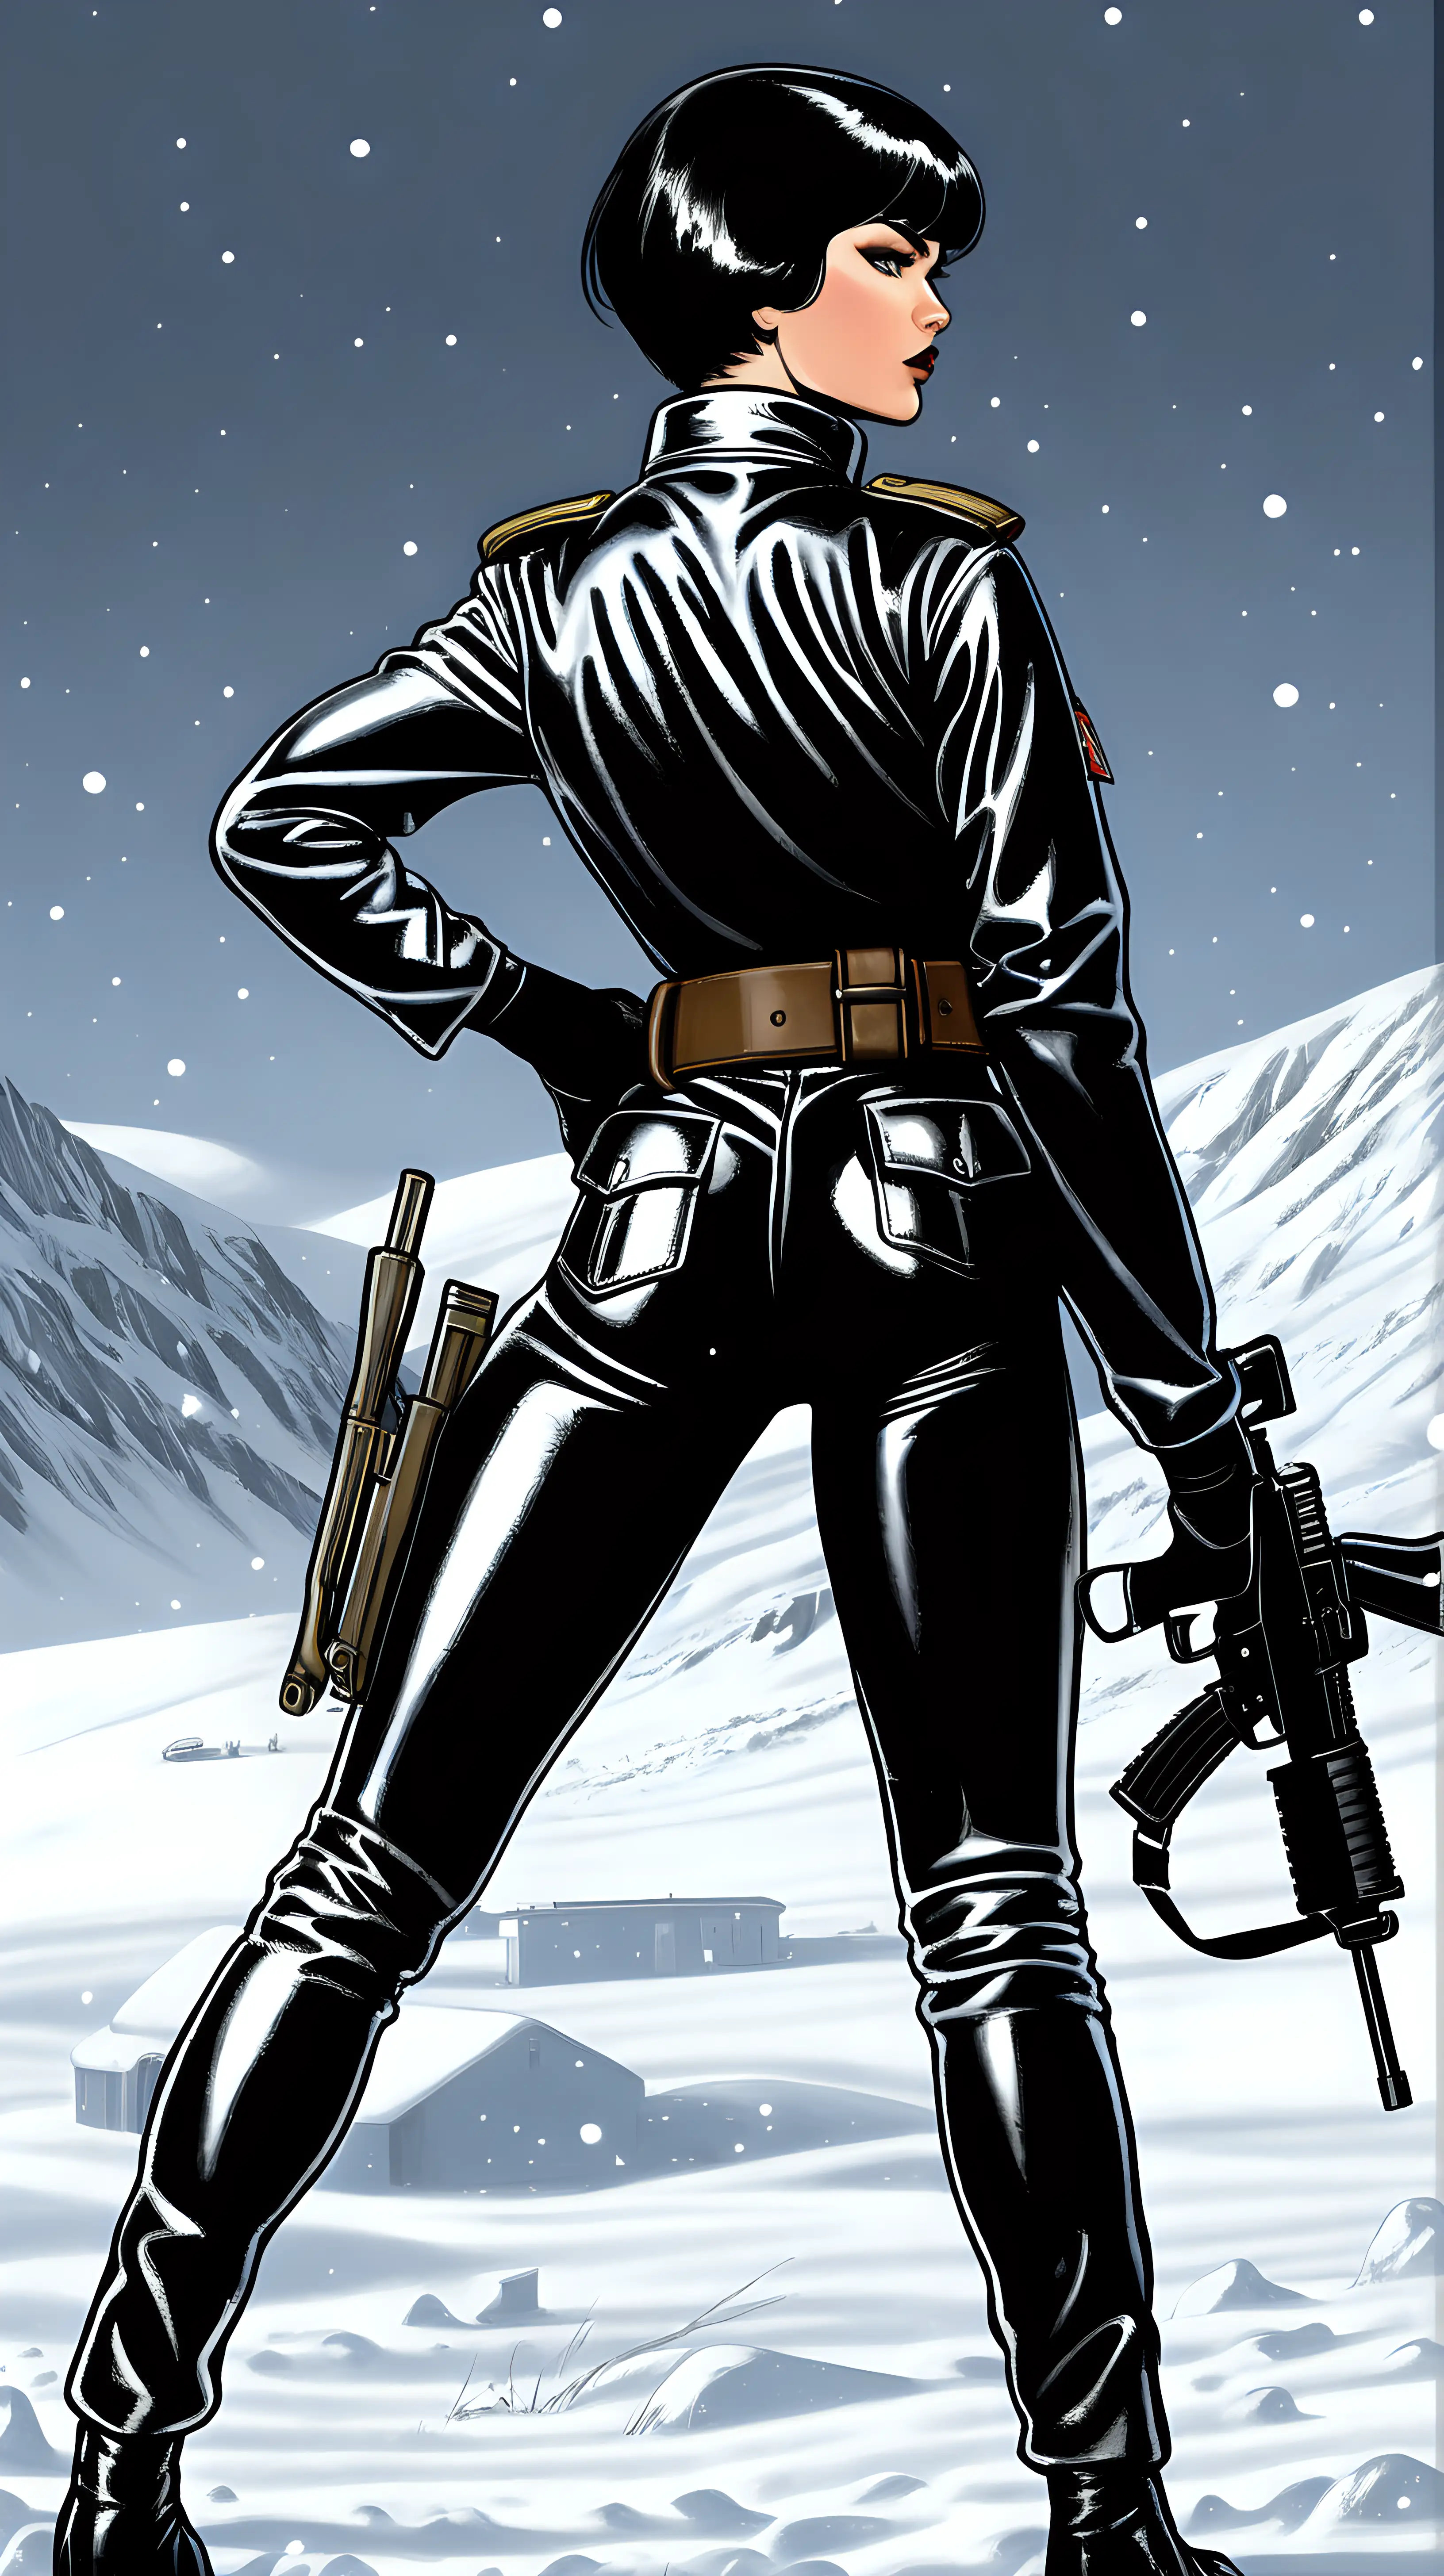 miss Jackson title comic book cover, Woman in tight black shiny soviet union tactical combat Suit, back view, holding Assault rifle, brown combat belt, Snowy battlefield background, Dark black short hair, black shades